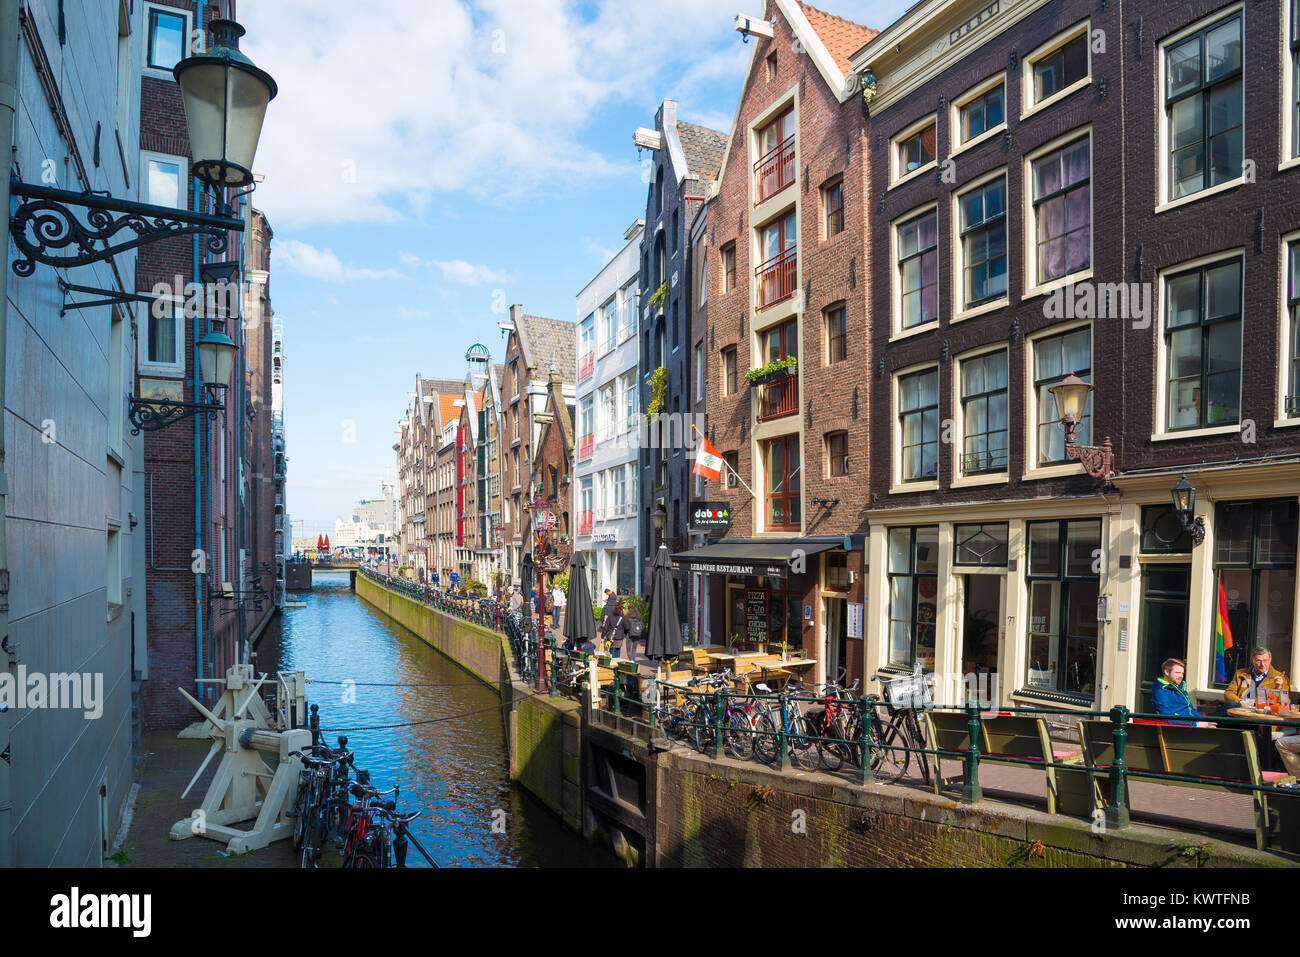 Amsterdam, Netherlands - April 19, 2017: Important tourist attraction in Amsterdam - the small canals in the city center. Stock Photo